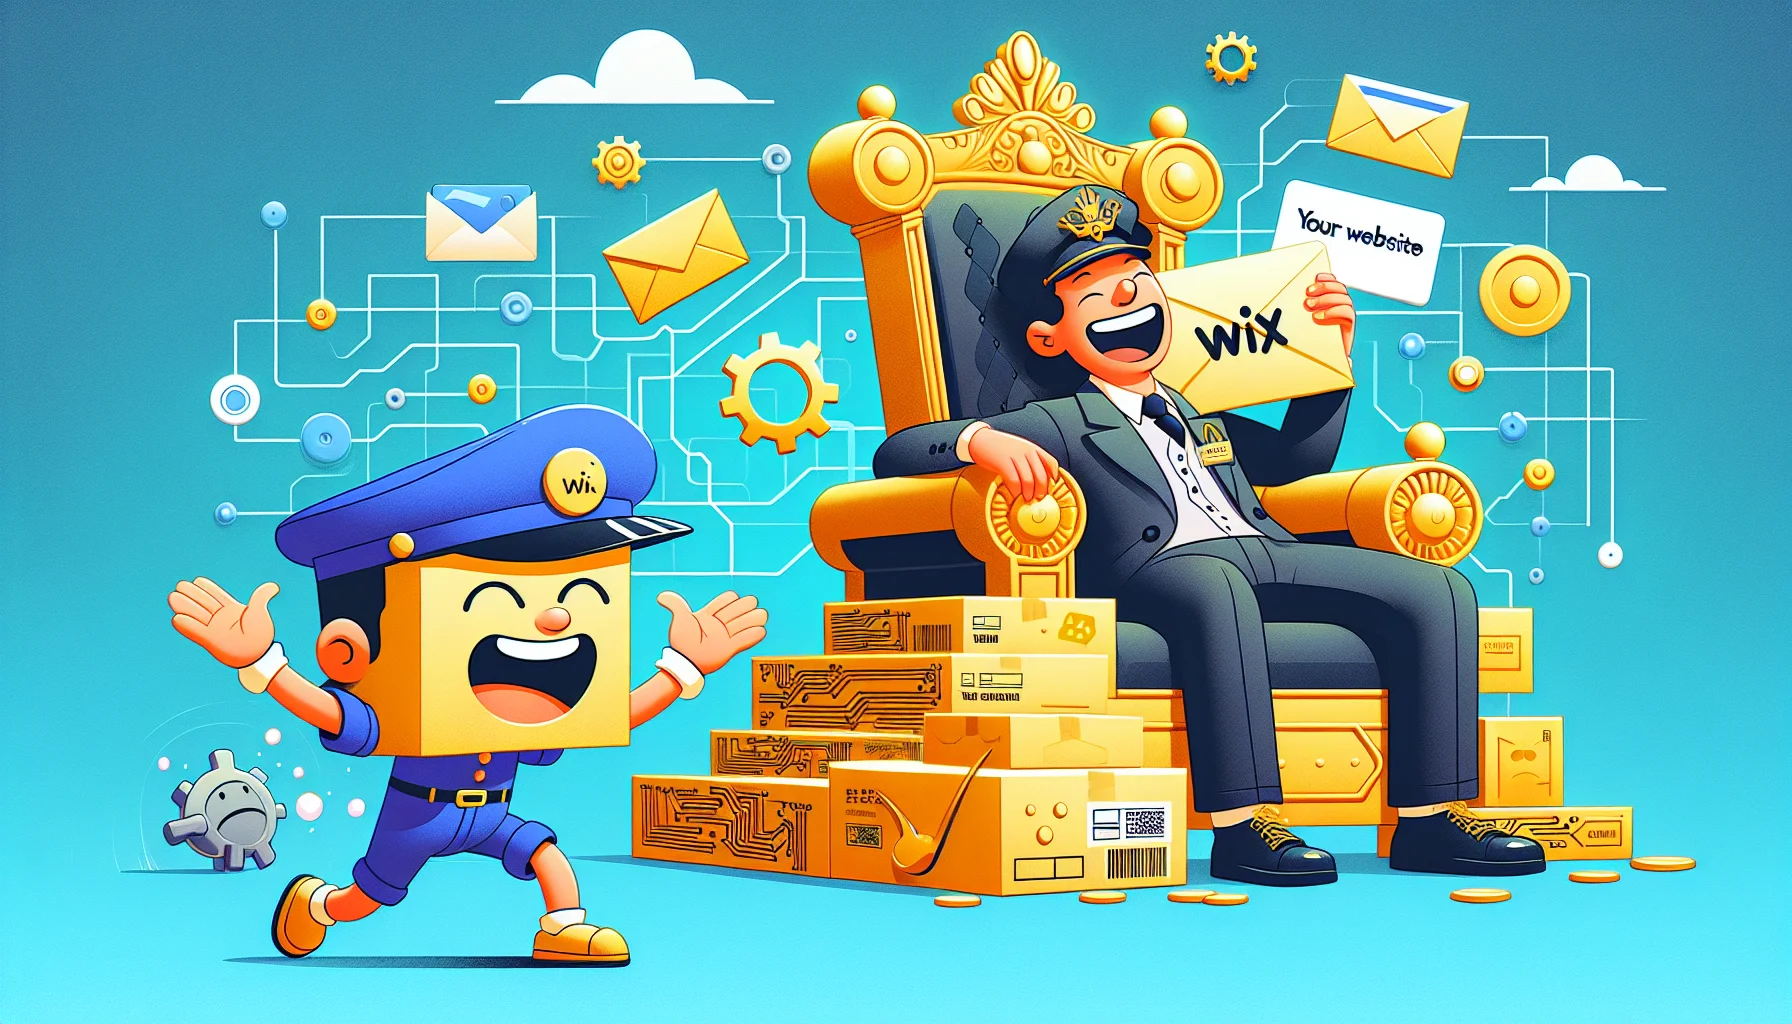 Create a humorous and enticing image that showcases a scenario of web hosting. There could be a mailman character, symbolizing 'Constant Contact', attempting to send a huge envelope which is humorously marked as 'Your Website'. Nearby, an engineer character representing 'Wix', is laughing while comfortably sitting on a golden throne made up of gears and circuits, showing off the ease of using Wix for web hosting.